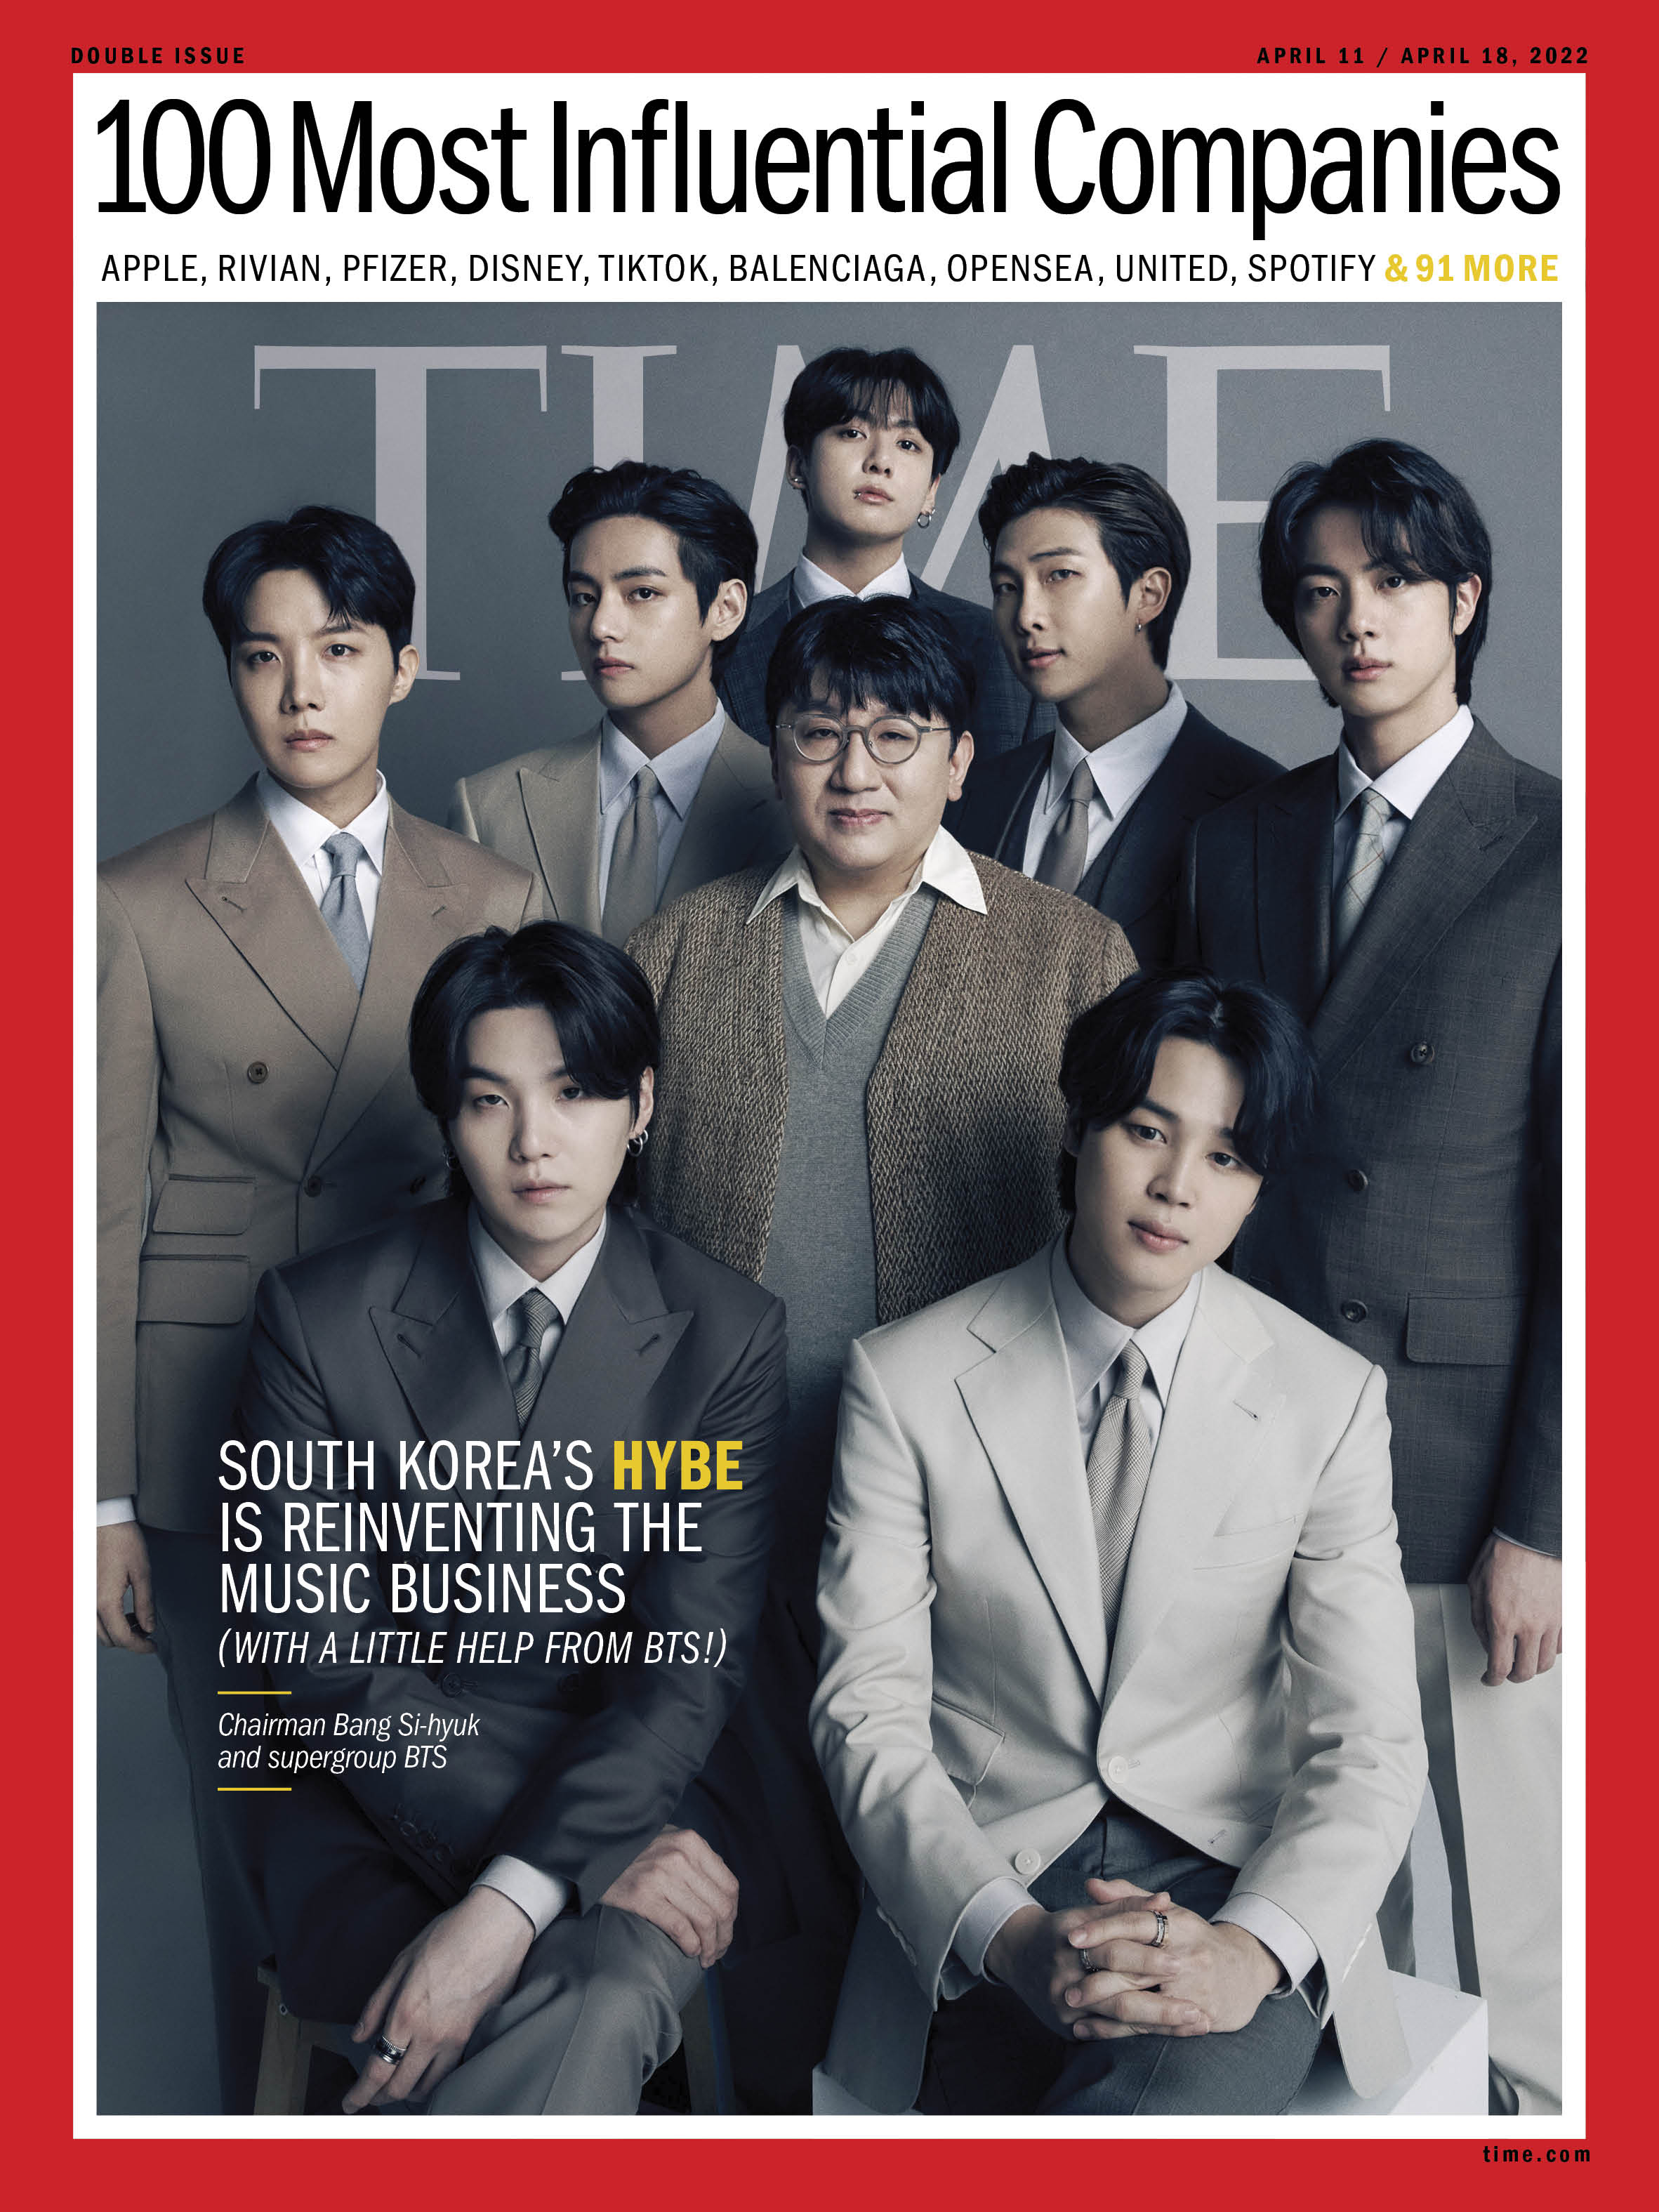 TIME100 Most Influential Companies HYBE BTS